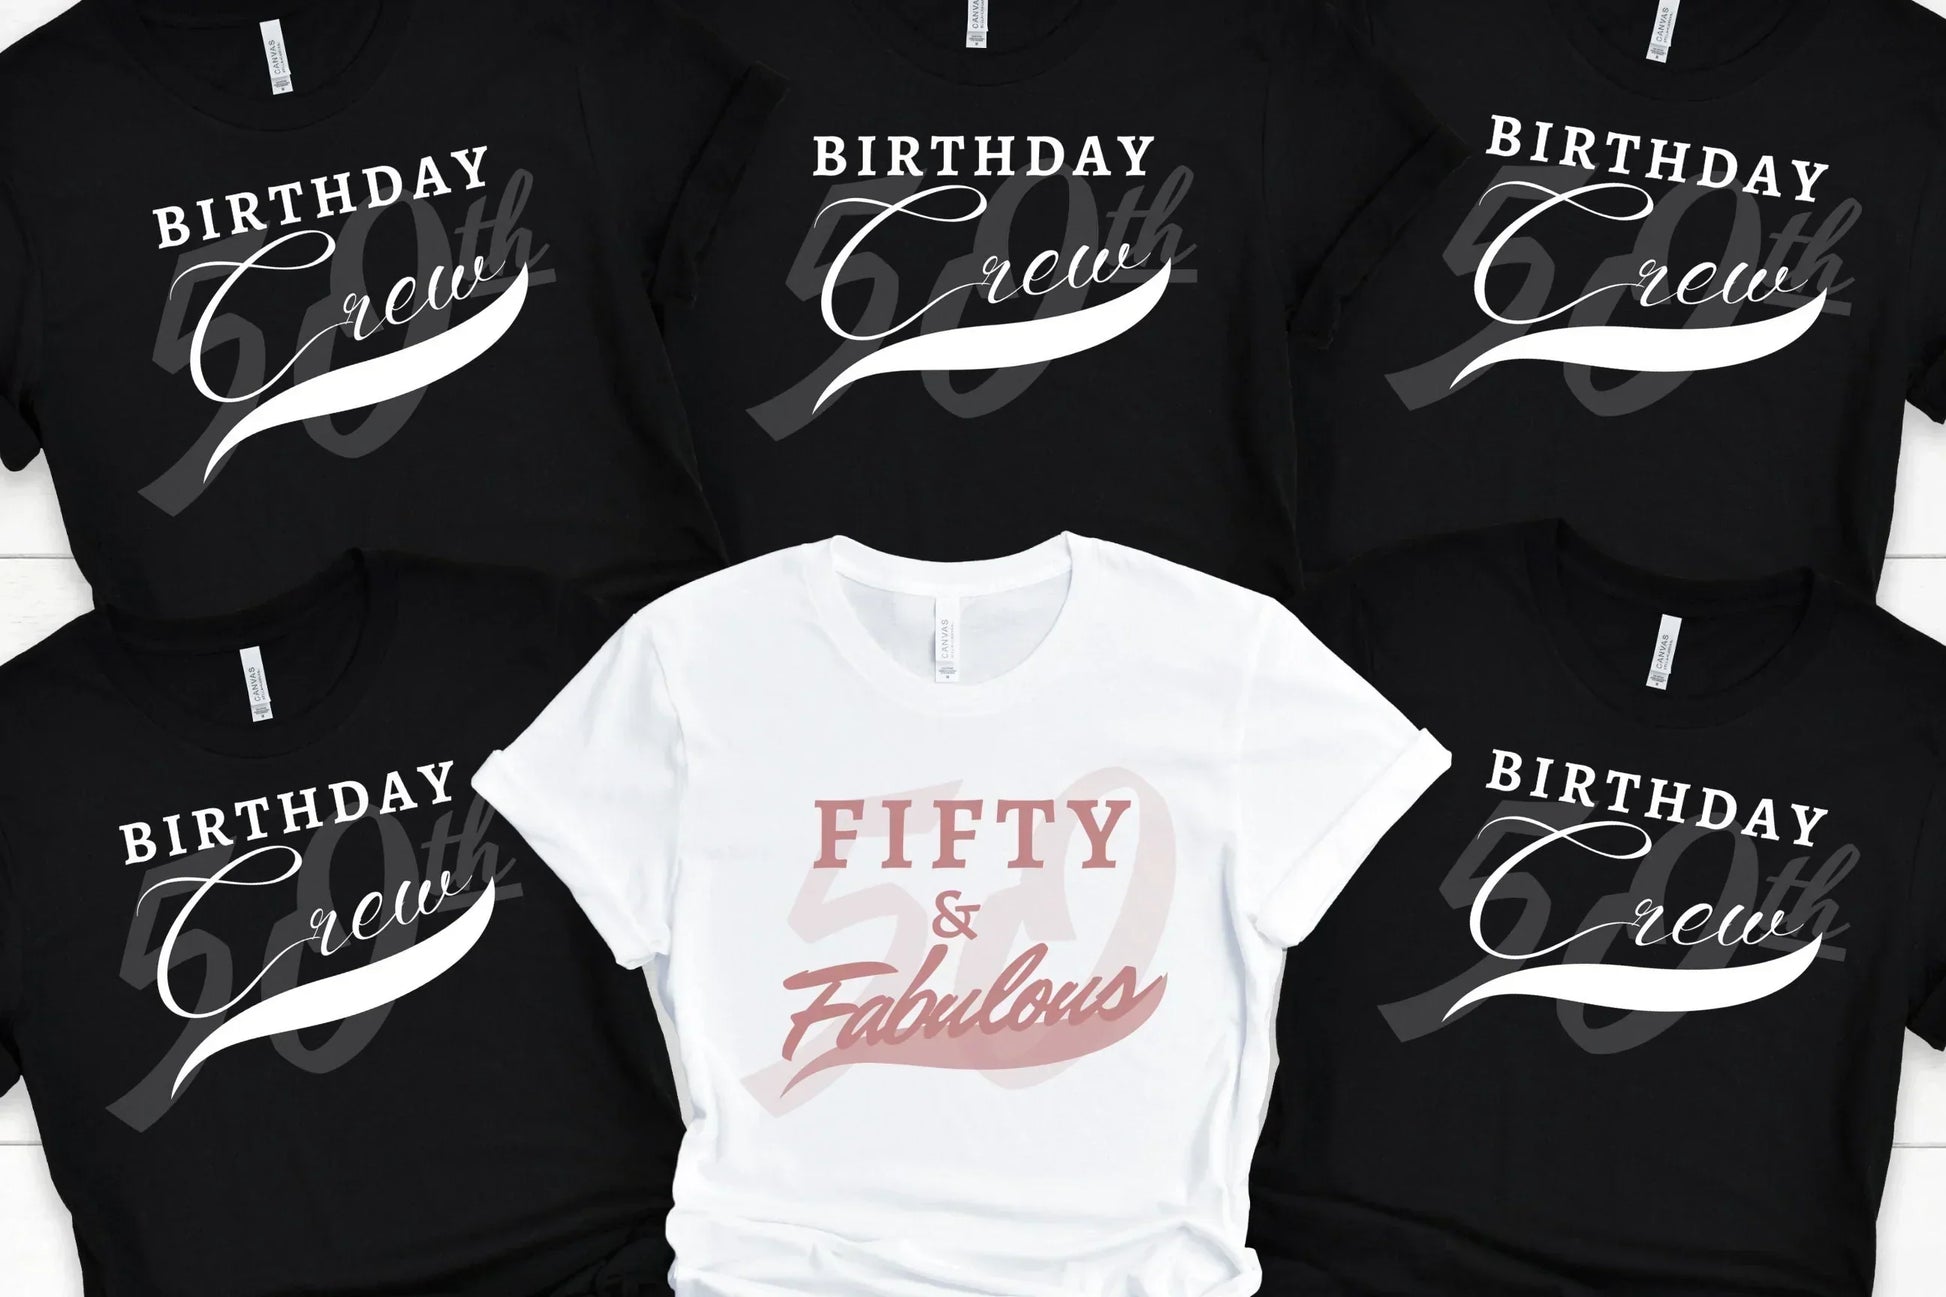 Fifty and Fabulous Shirt, 50th Birthday Shirt - Celebrate Your Milestone in Style!